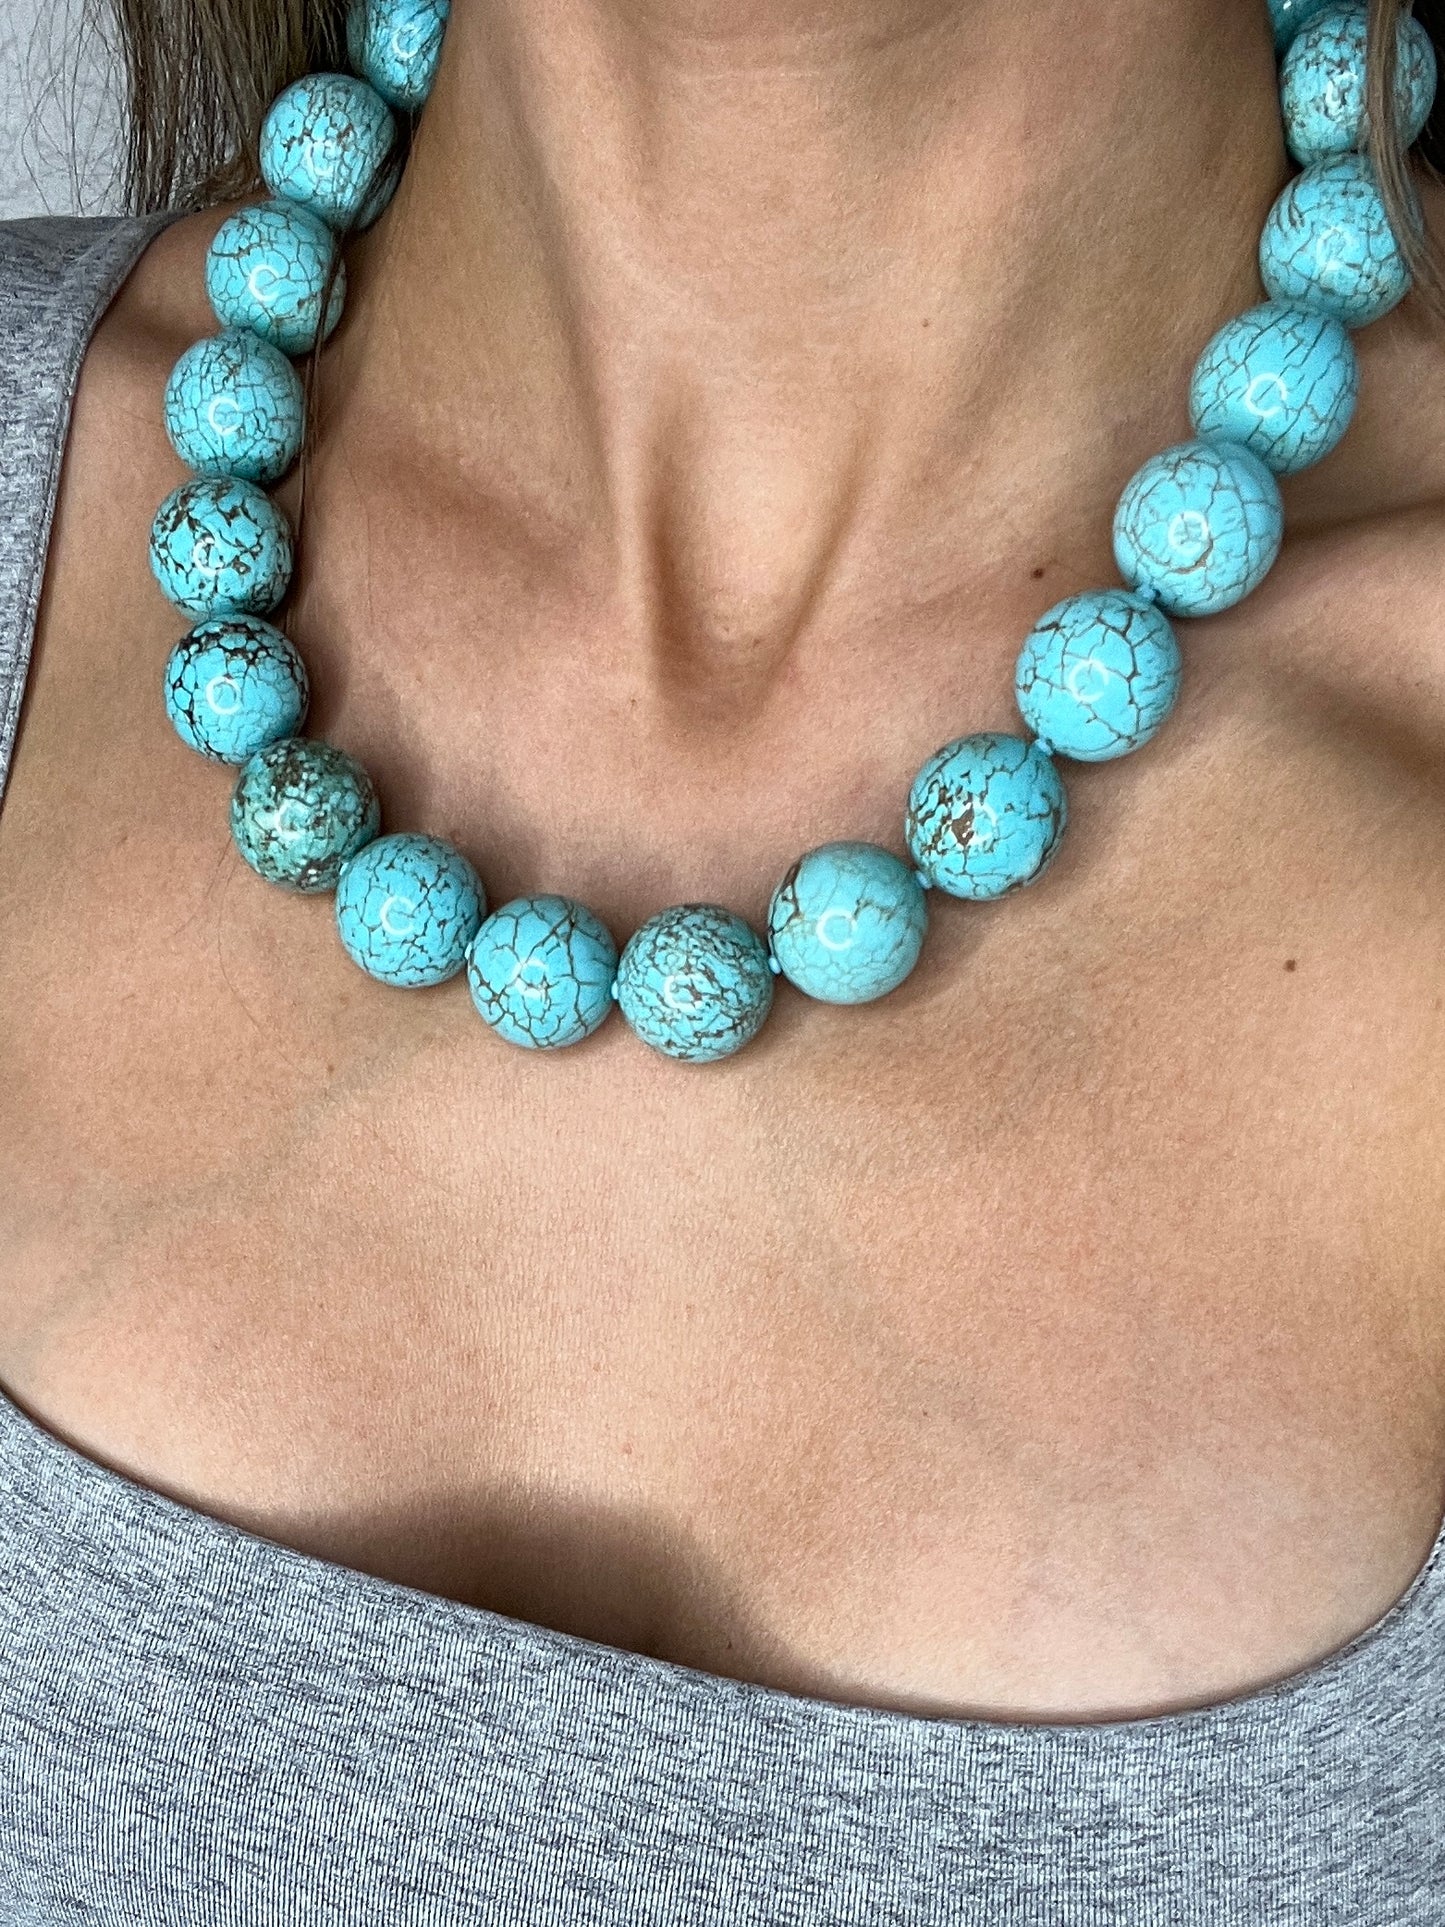 Turquoise Sphere Short Necklace - Born To Glam